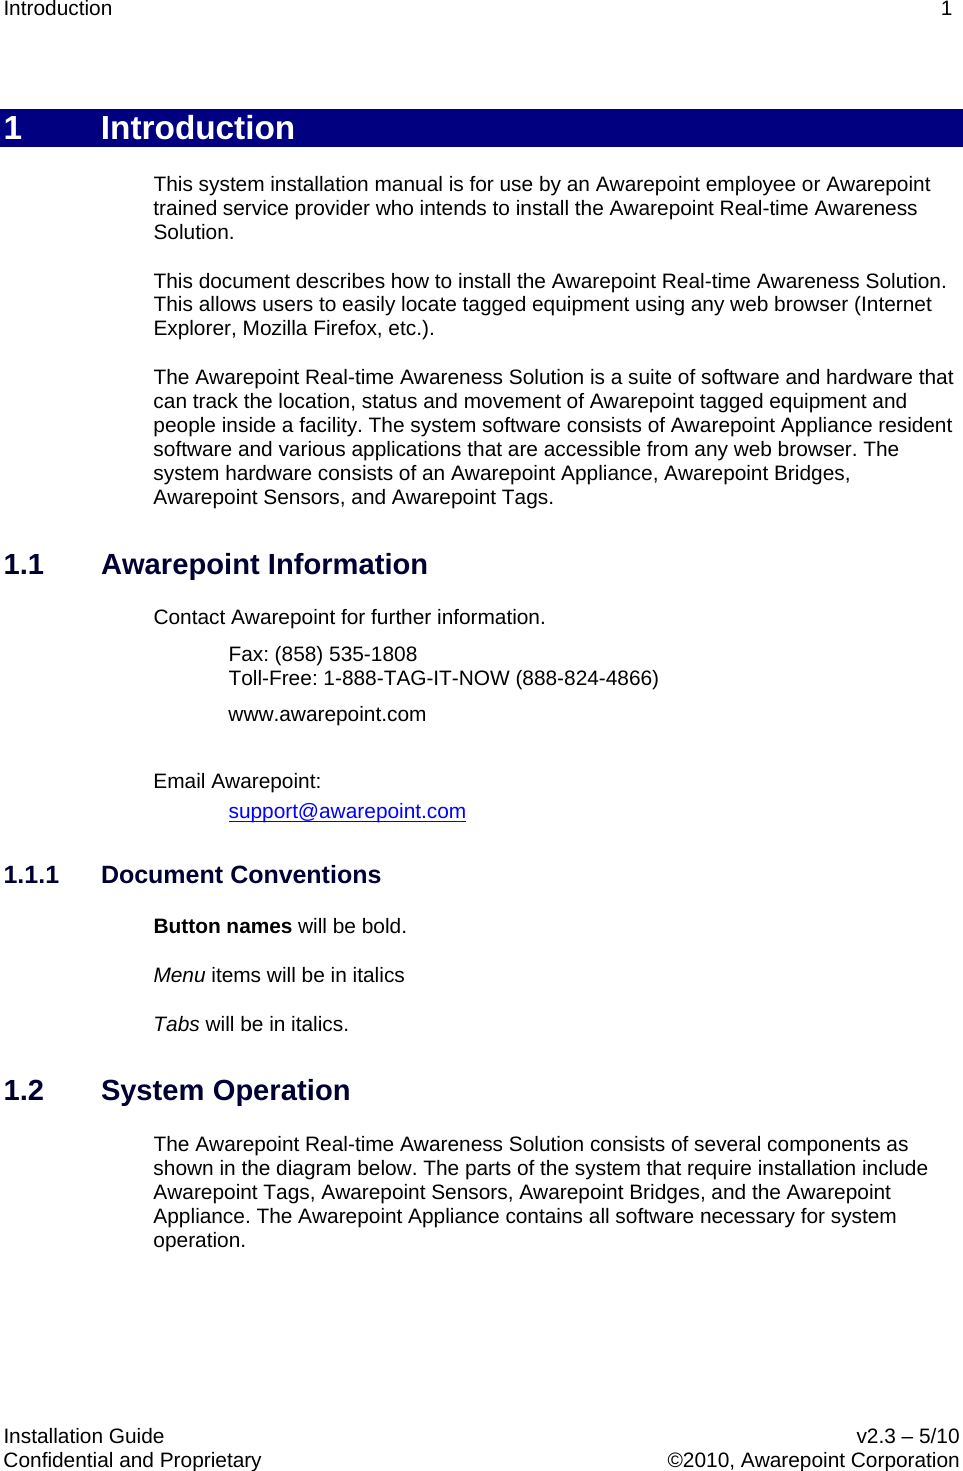 Introduction    1   Installation Guide    v2.3 – 5/10 Confidential and Proprietary    ©2010, Awarepoint Corporation  1  Introduction This system installation manual is for use by an Awarepoint employee or Awarepoint trained service provider who intends to install the Awarepoint Real-time Awareness Solution. This document describes how to install the Awarepoint Real-time Awareness Solution. This allows users to easily locate tagged equipment using any web browser (Internet Explorer, Mozilla Firefox, etc.).  The Awarepoint Real-time Awareness Solution is a suite of software and hardware that can track the location, status and movement of Awarepoint tagged equipment and people inside a facility. The system software consists of Awarepoint Appliance resident software and various applications that are accessible from any web browser. The system hardware consists of an Awarepoint Appliance, Awarepoint Bridges, Awarepoint Sensors, and Awarepoint Tags.  1.1 Awarepoint Information Contact Awarepoint for further information.   Fax: (858) 535-1808 Toll-Free: 1-888-TAG-IT-NOW (888-824-4866)  www.awarepoint.com  Email Awarepoint: support@awarepoint.com 1.1.1 Document Conventions Button names will be bold. Menu items will be in italics Tabs will be in italics. 1.2 System Operation The Awarepoint Real-time Awareness Solution consists of several components as shown in the diagram below. The parts of the system that require installation include Awarepoint Tags, Awarepoint Sensors, Awarepoint Bridges, and the Awarepoint Appliance. The Awarepoint Appliance contains all software necessary for system operation.   